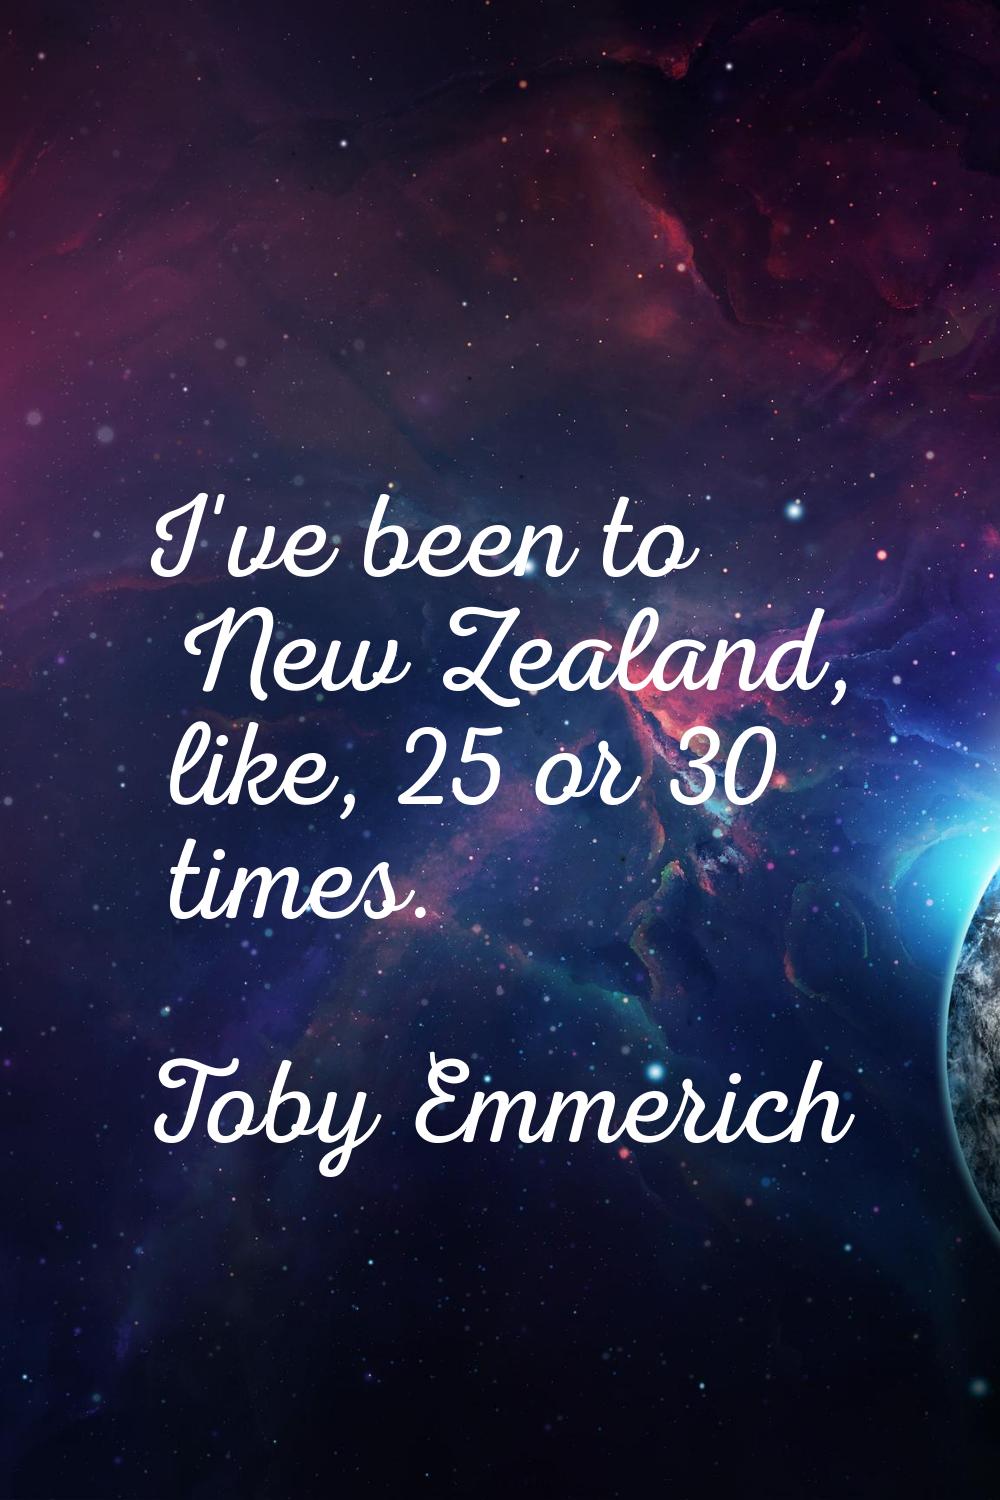 I've been to New Zealand, like, 25 or 30 times.